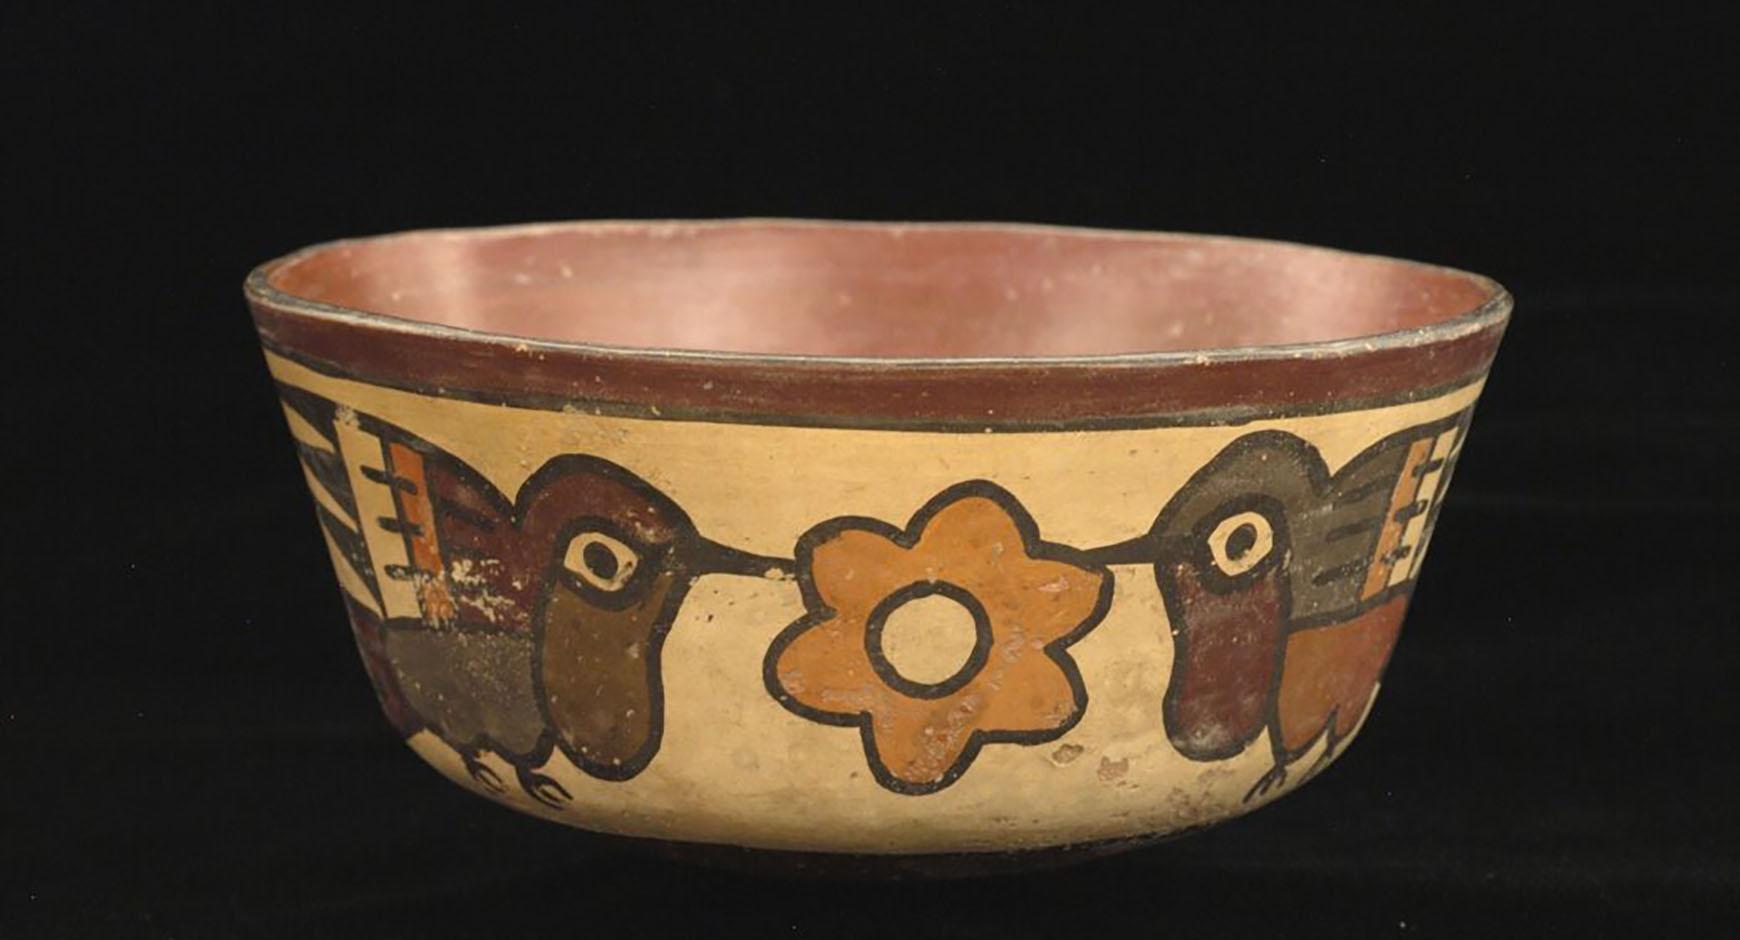 colombian pottery artifact bowl with hummingbird design